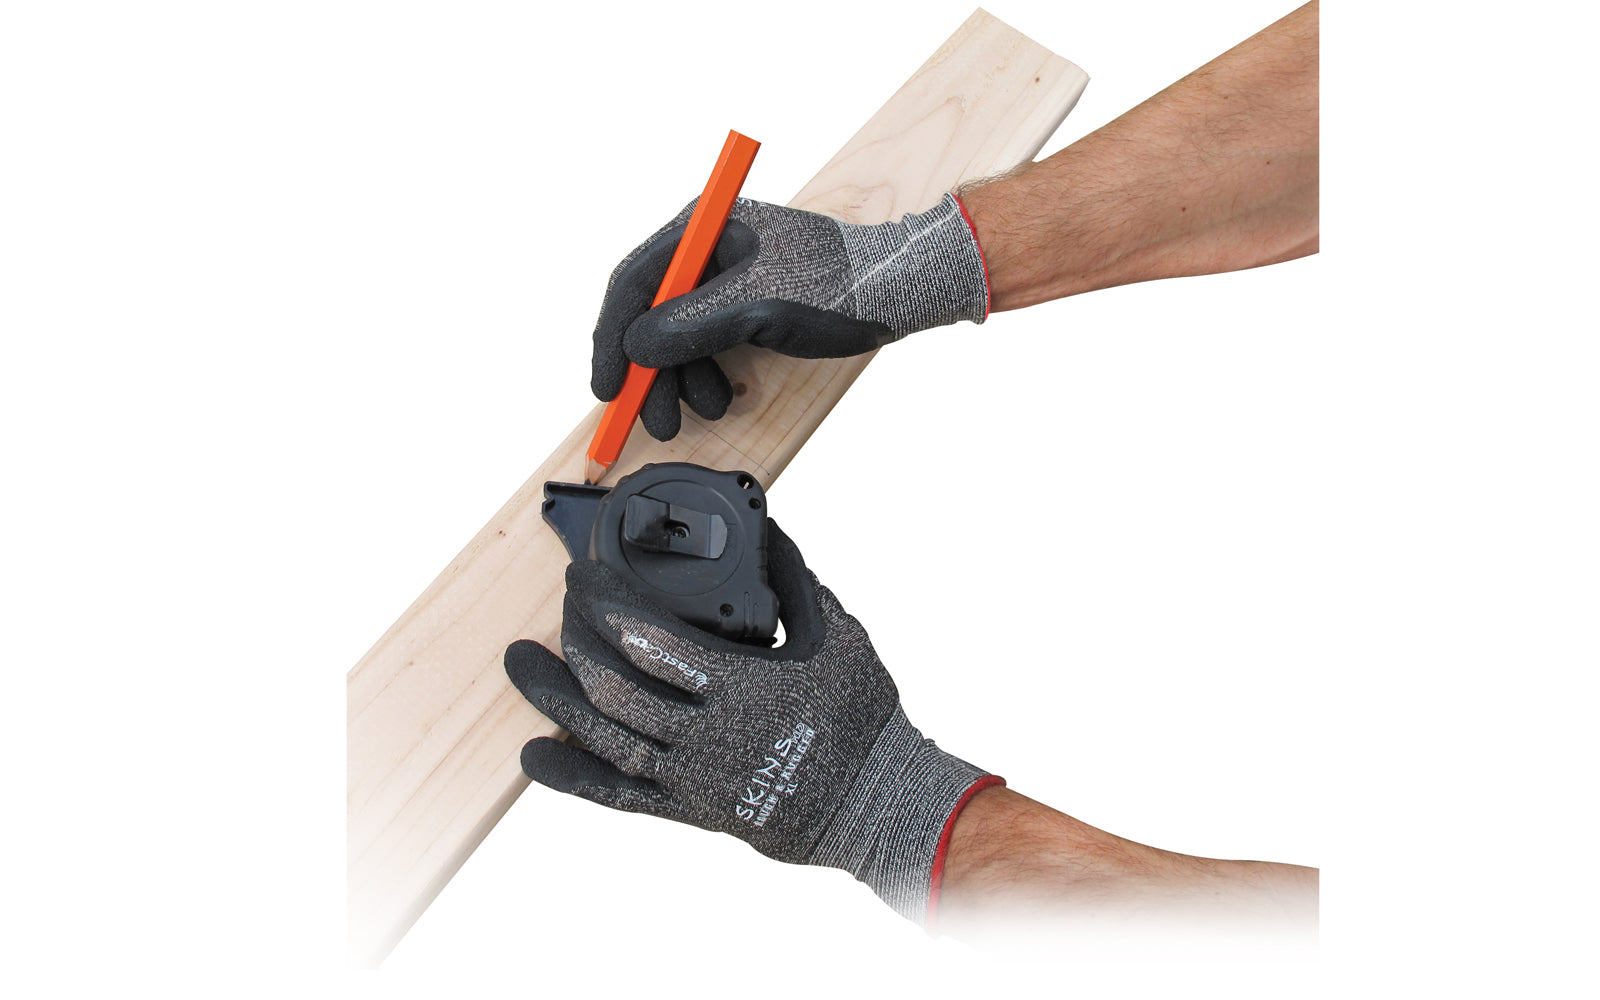 FastCap Skins HD Work Gloves - Latex Coated Palms - Model SKINS HD ~ Excellent for general construction, handling wood lumber & melamine, mill work, glass handling, metal parts, automotive repair & parts assembly